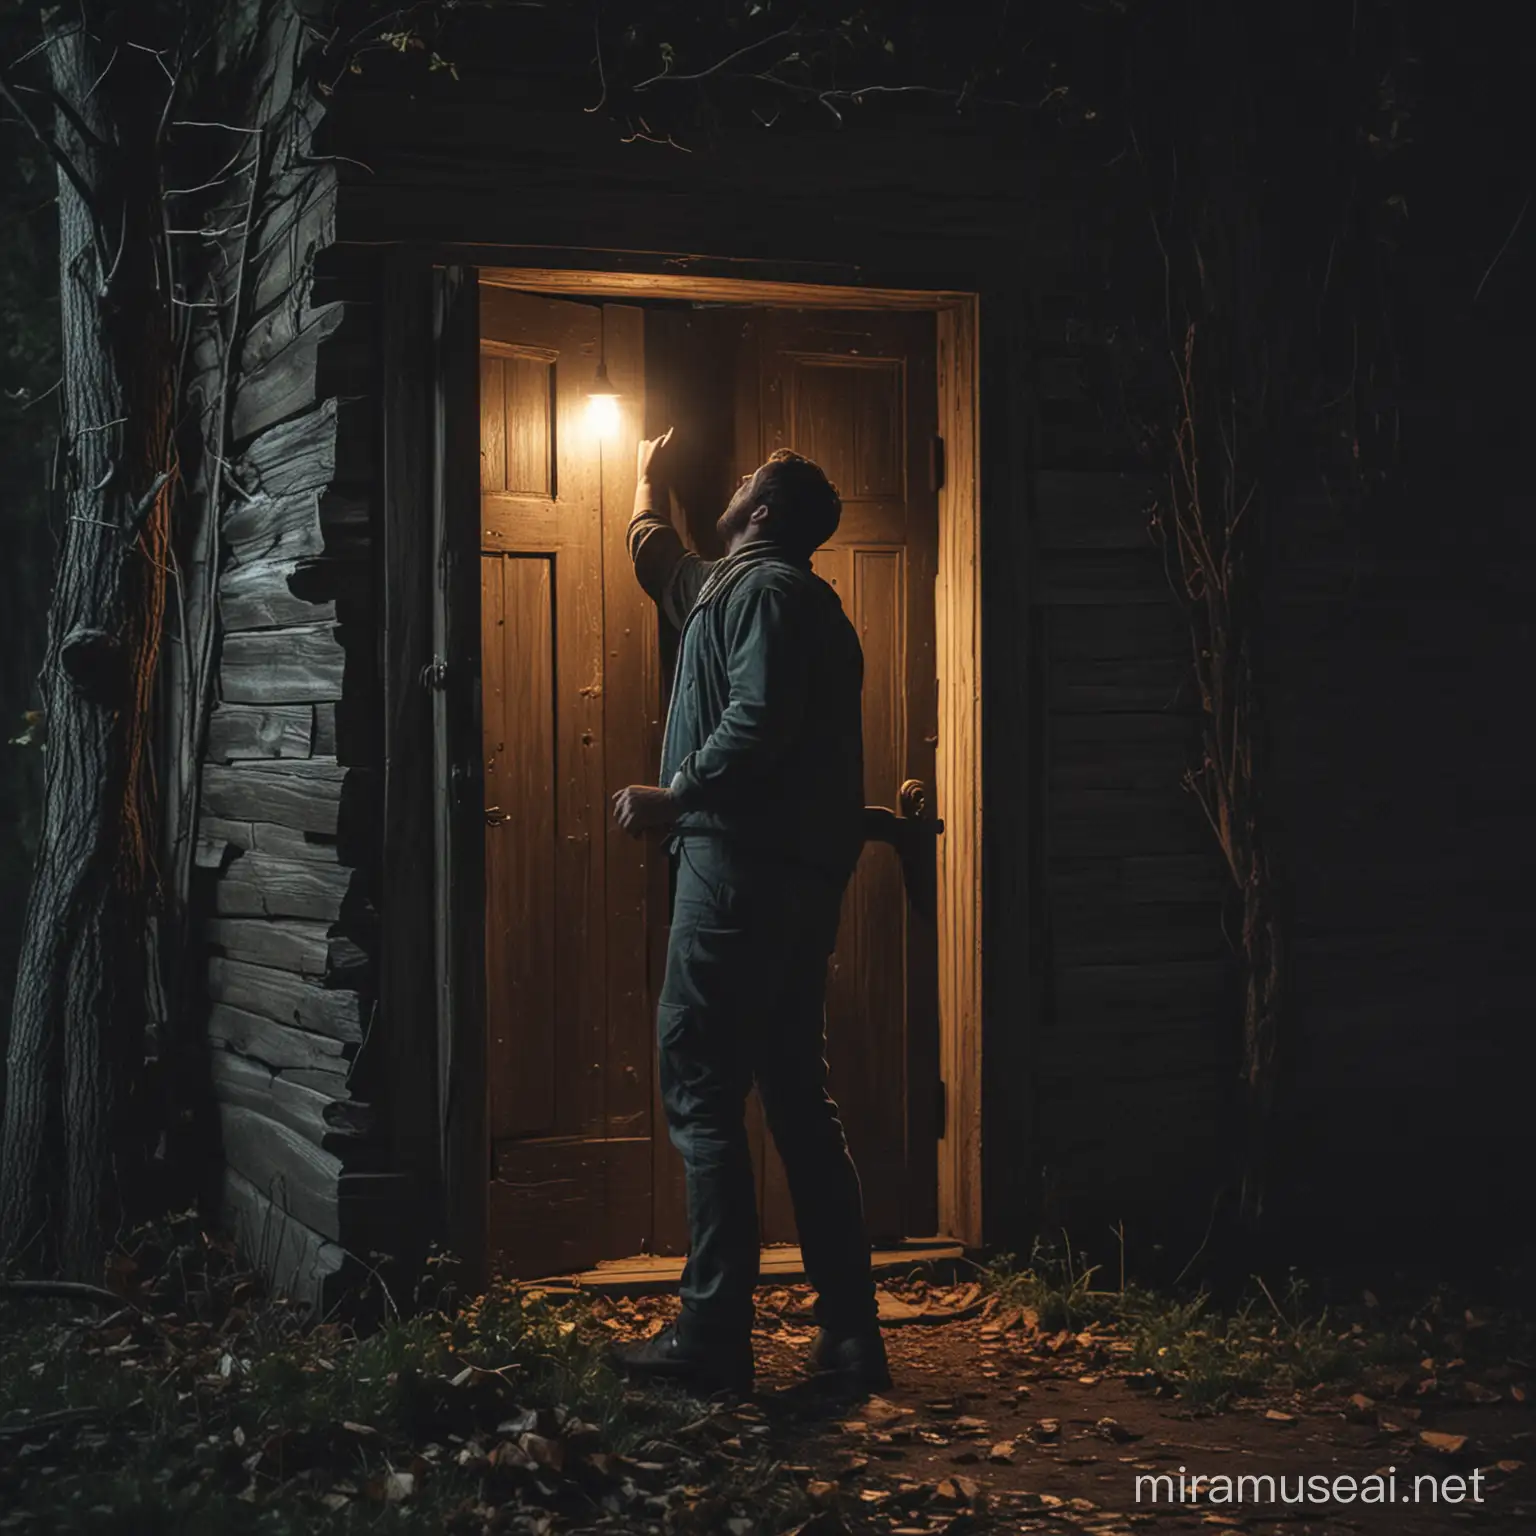 make a guy knocking on a door, inside the forest, at night, at a old house